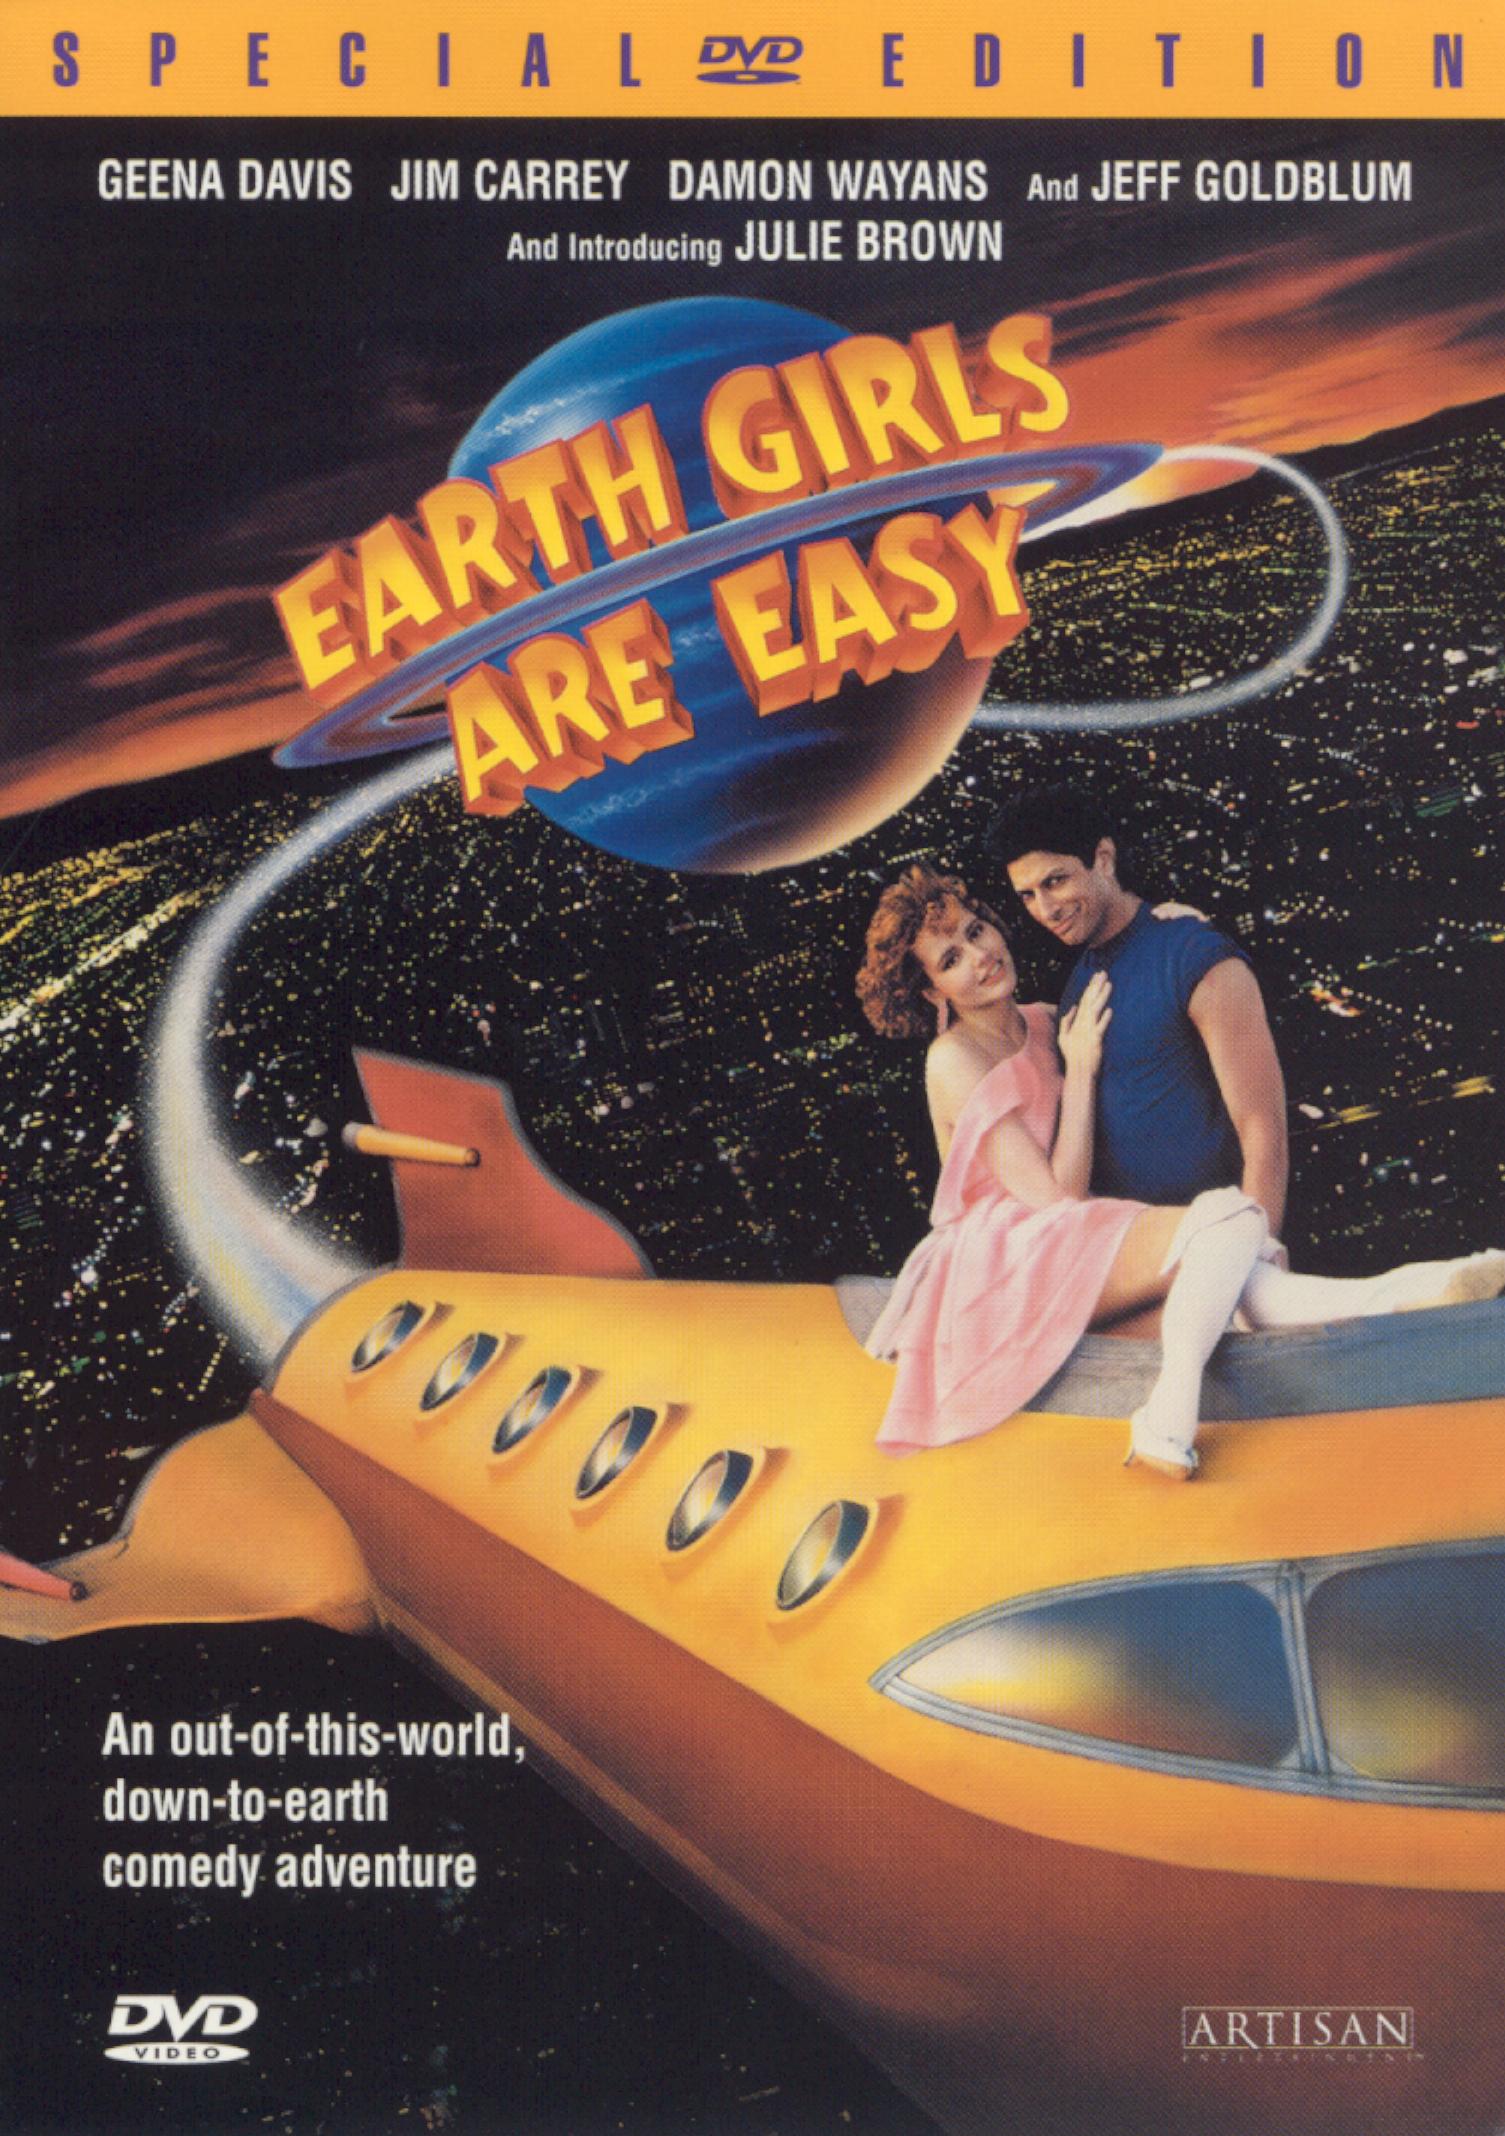 Earth Girls Are Easy [Special Edition] cover art